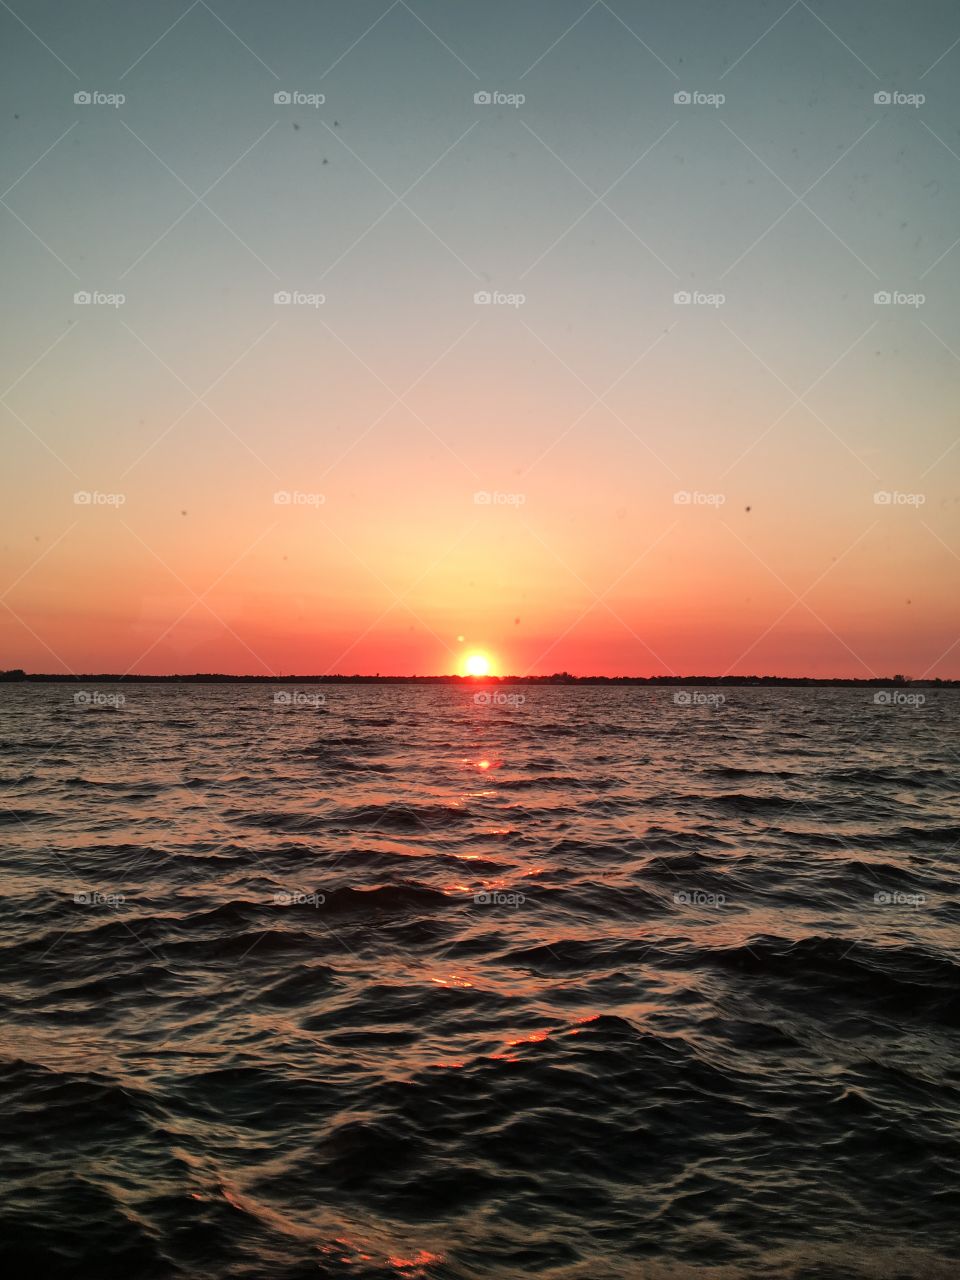 A photo of the Sunset reflected upon the water of the ocean.